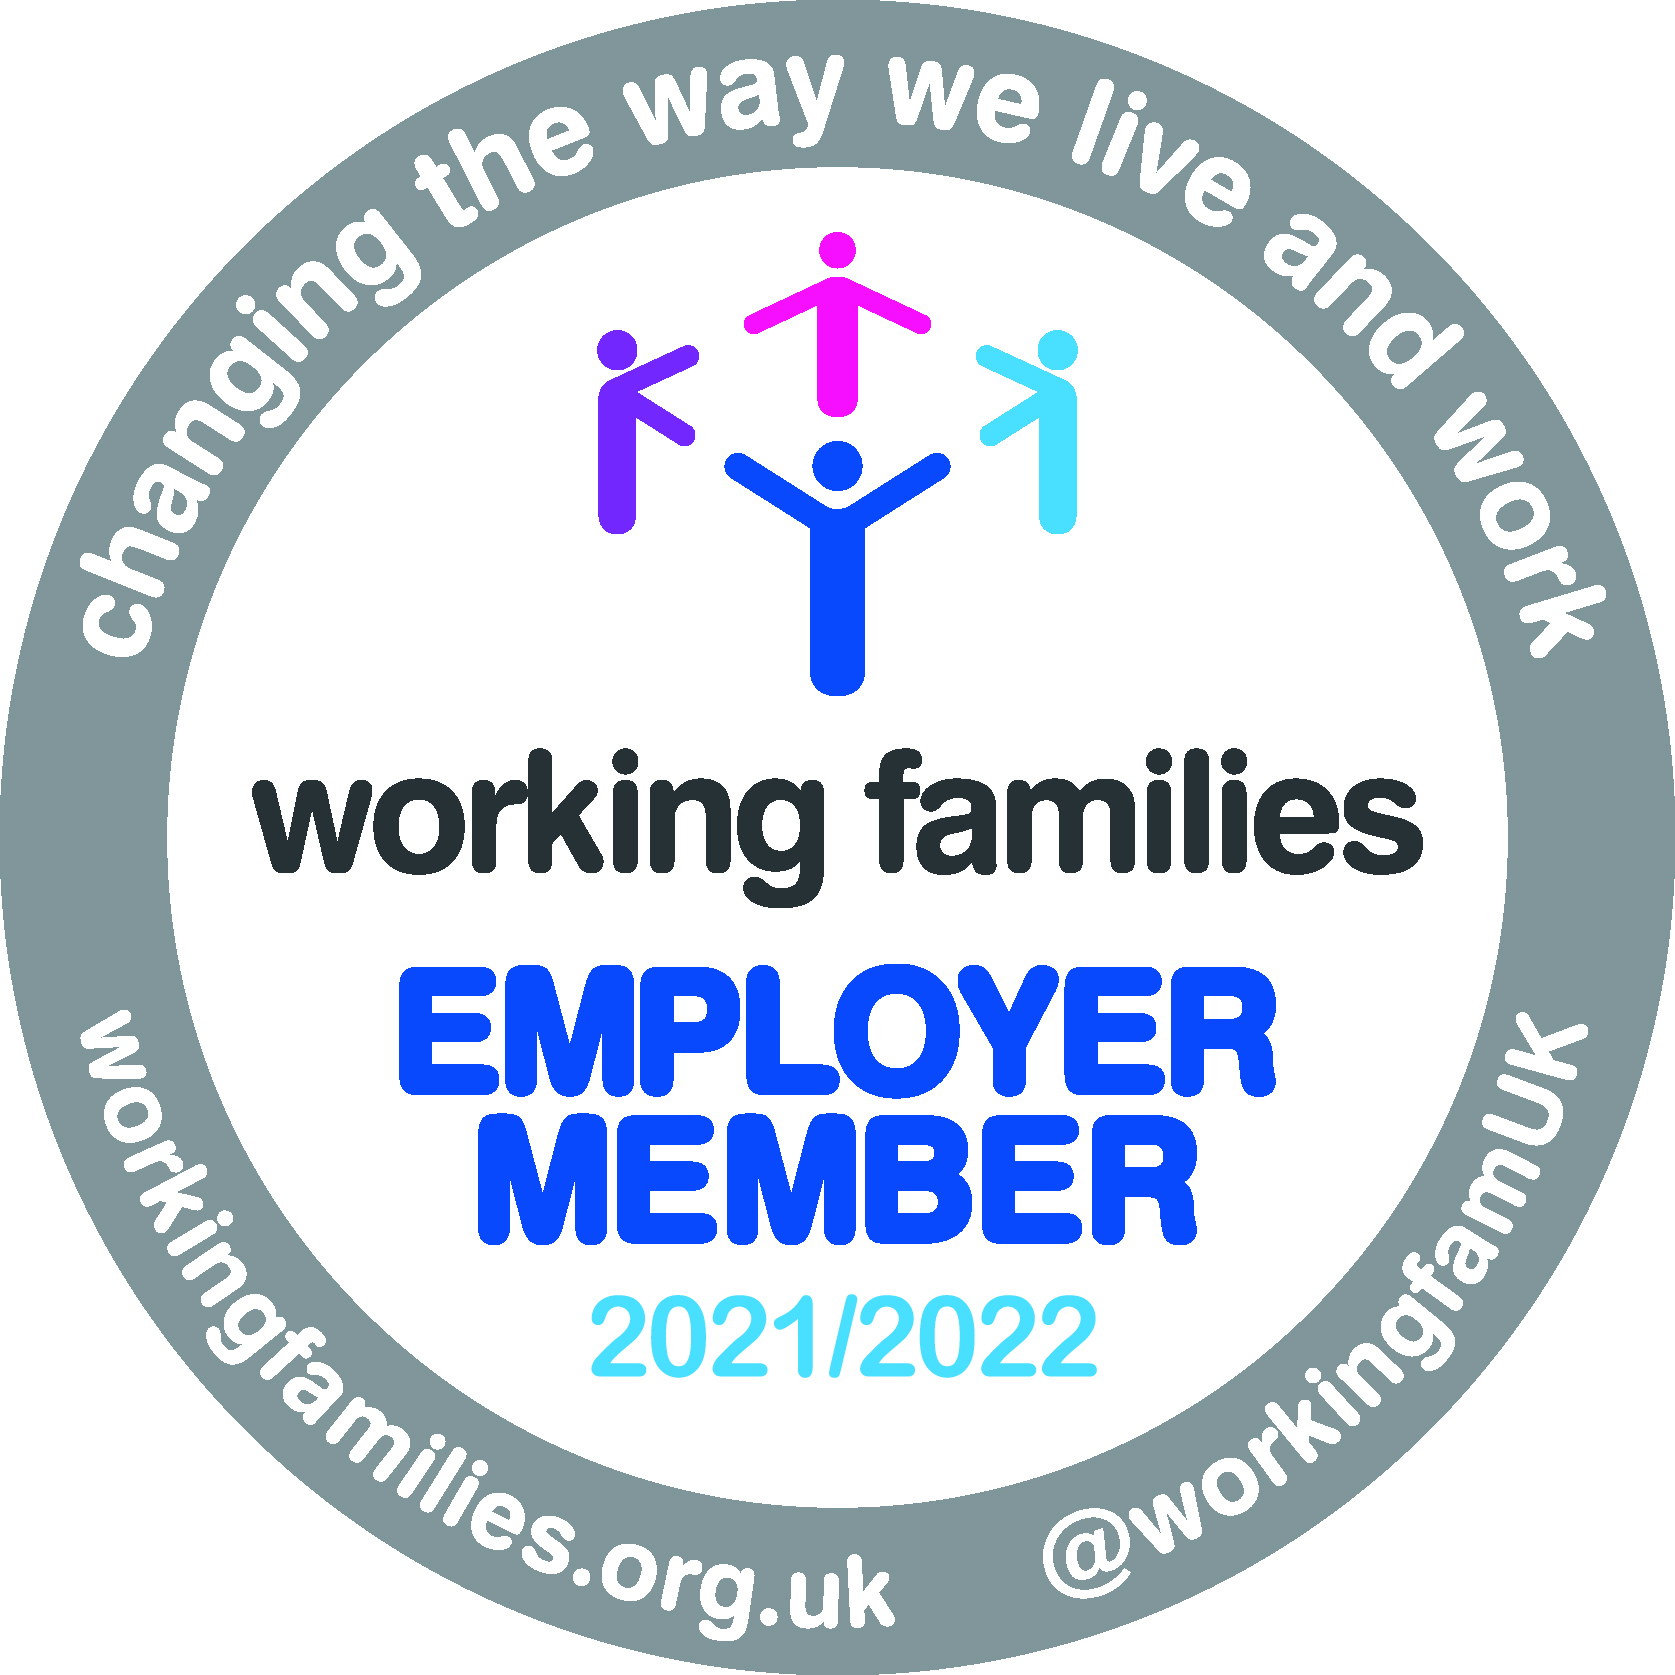 Working families employer member 2018/2019